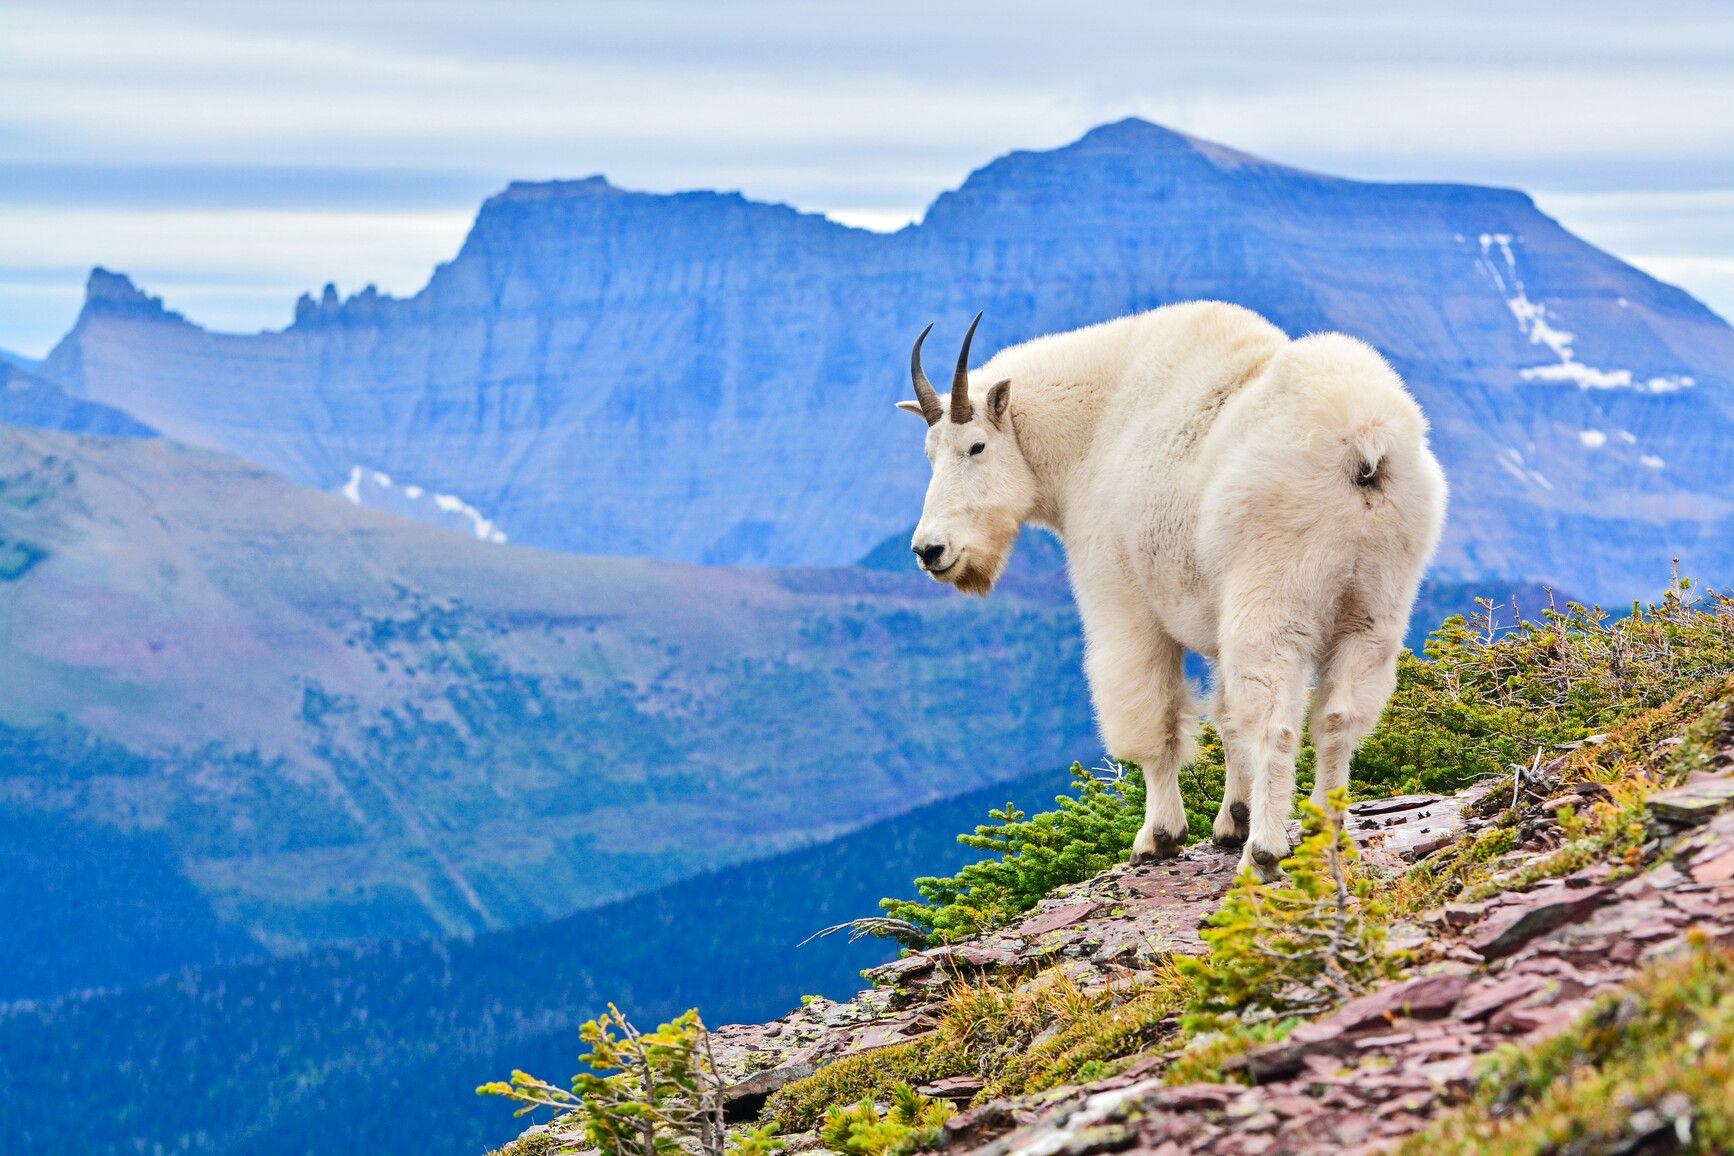 A mountain goat stands on Akamina Ridge against a backdrop of mountains with glacial cirques.